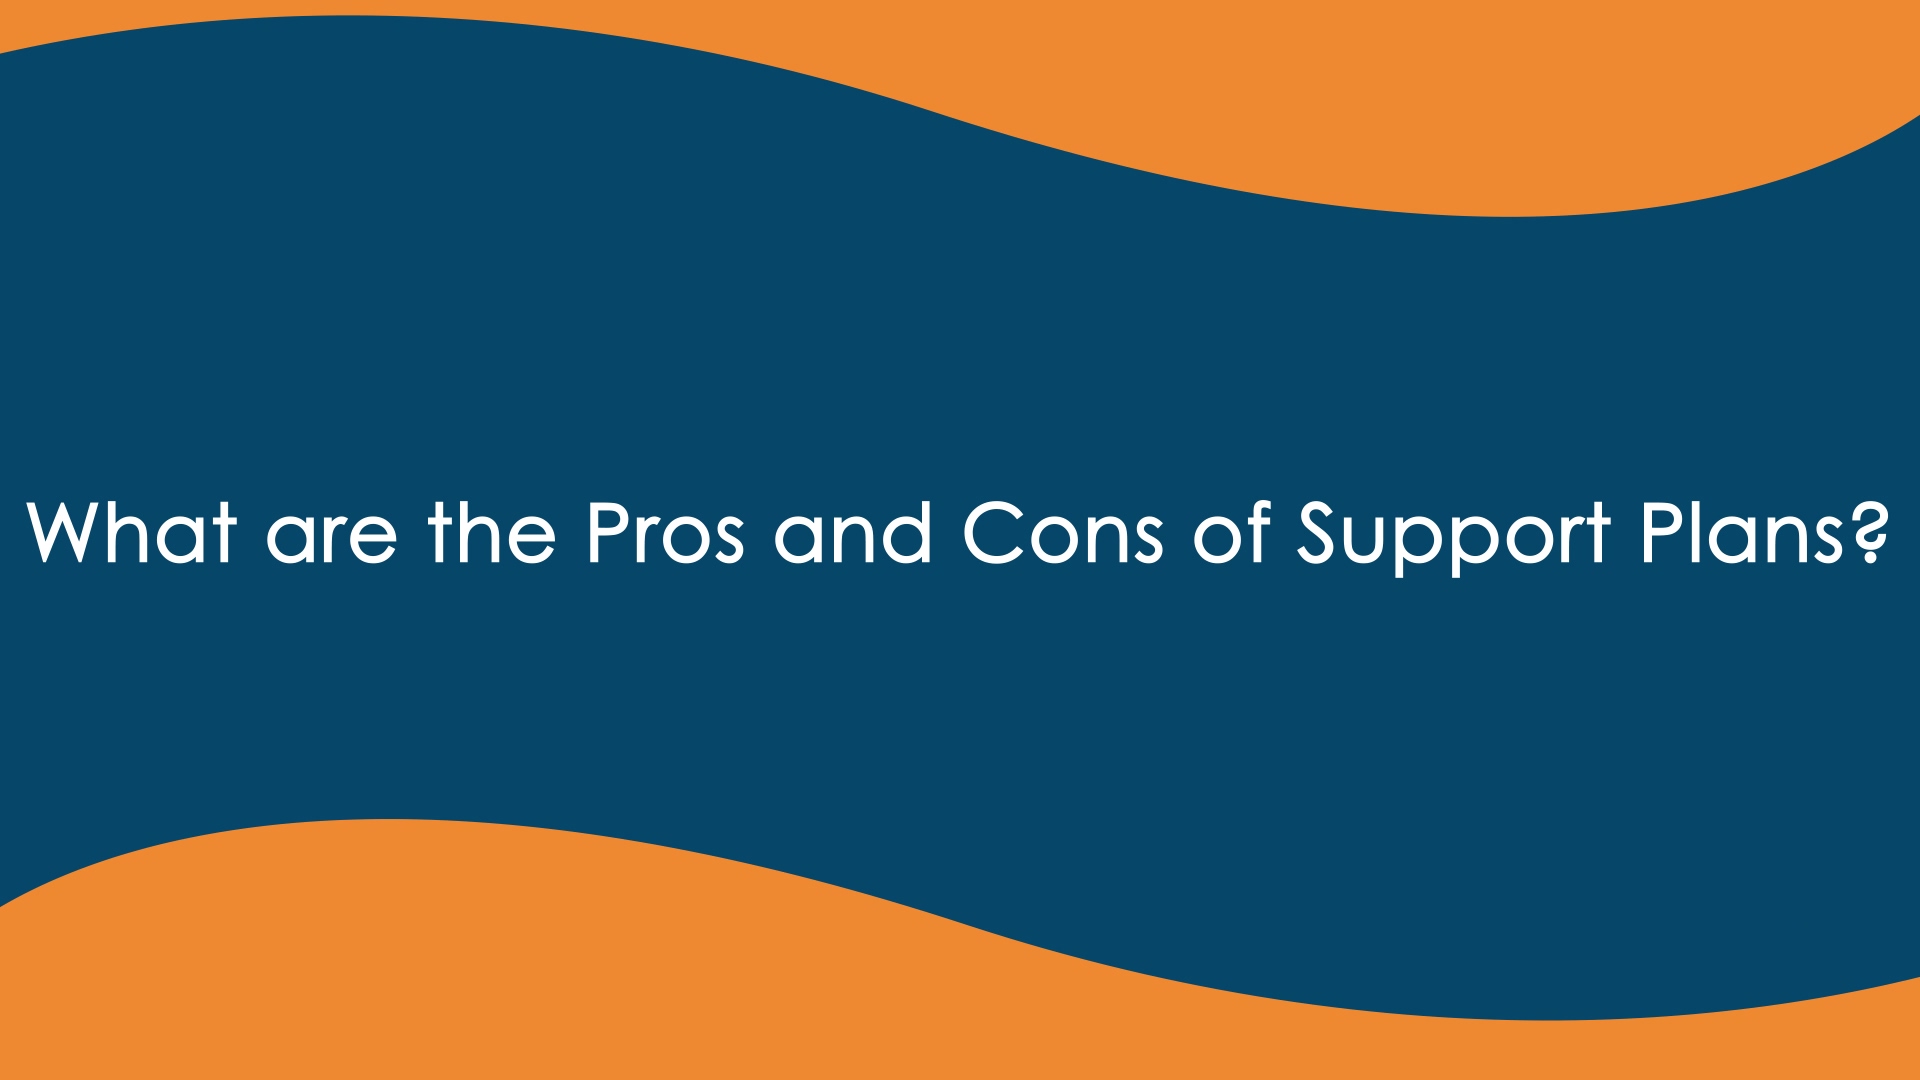 What are the Pros and Cons of Support Plans